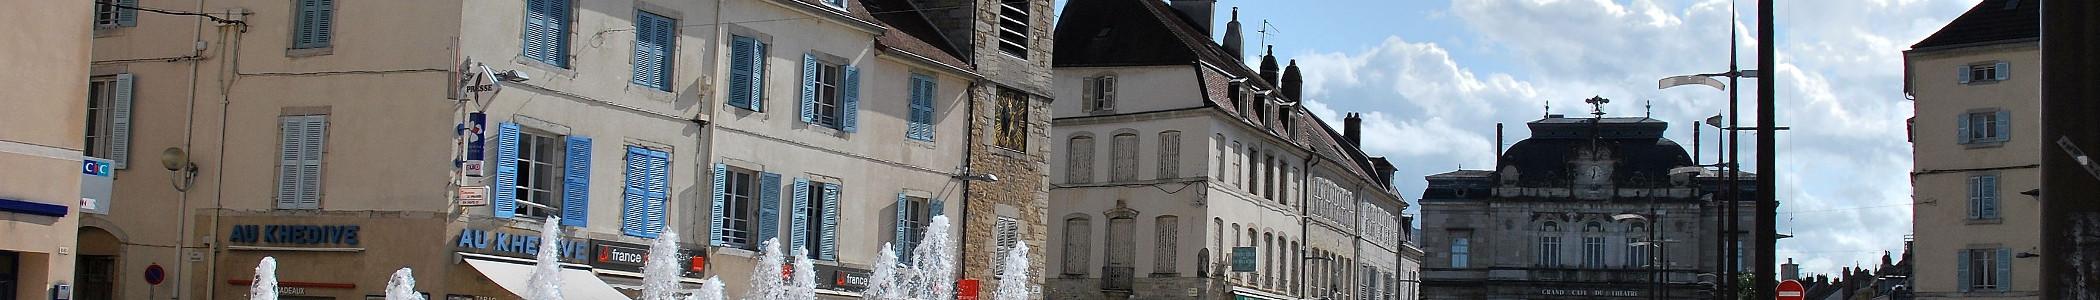 Banner image for Lons-le-Saunier on GigsGuide